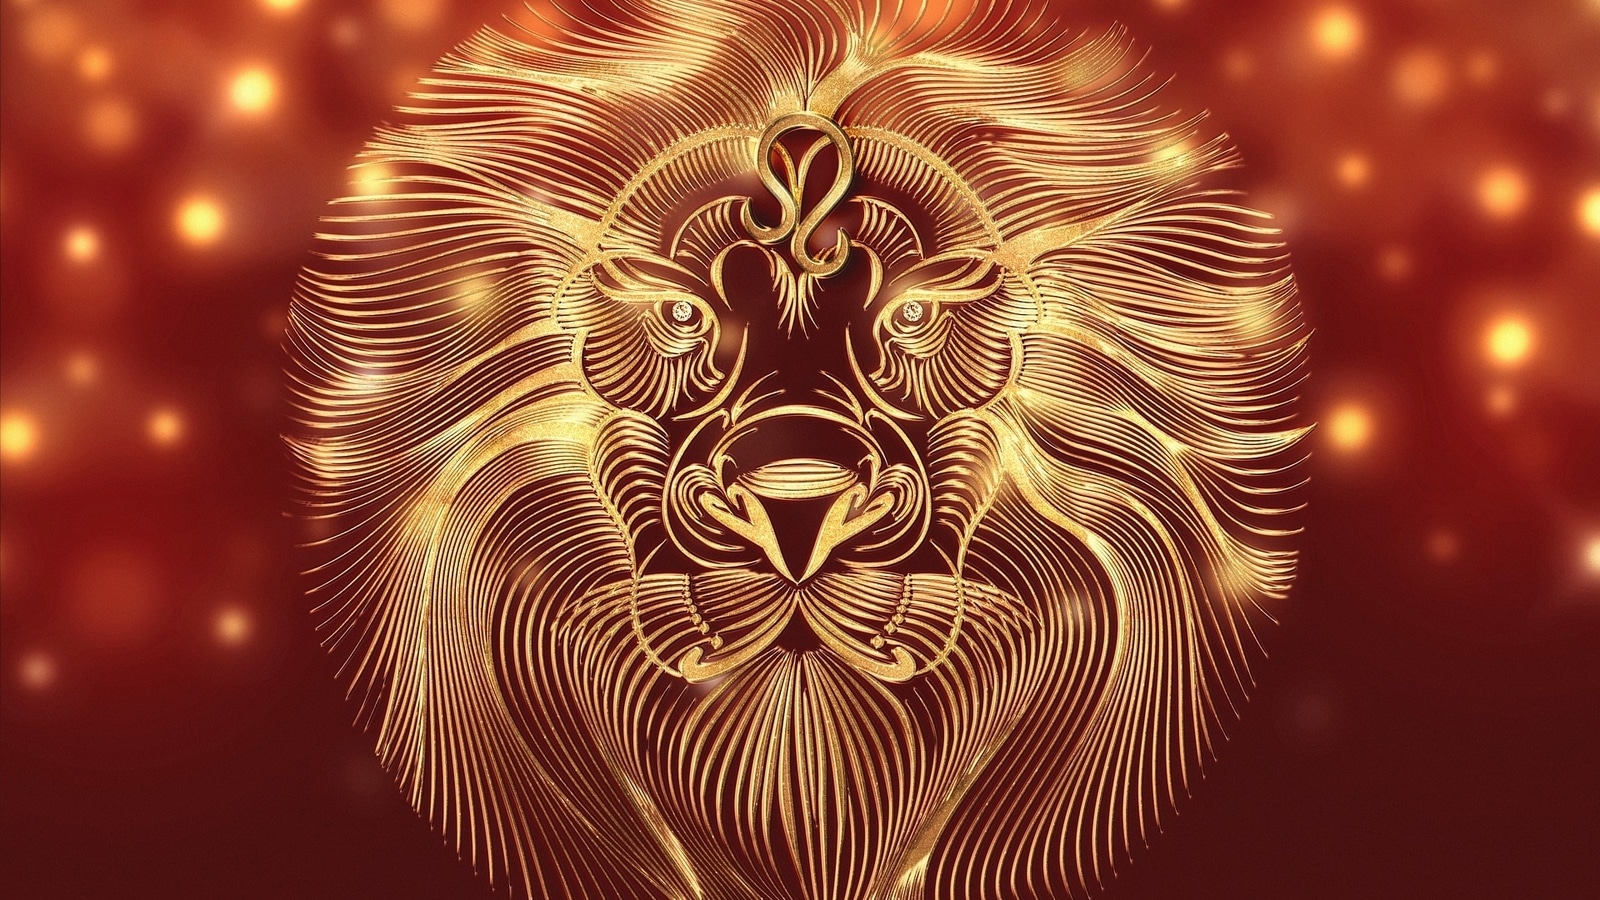 Leo Horoscope Today, October 17, 2022: Focus attention on positive thoughts